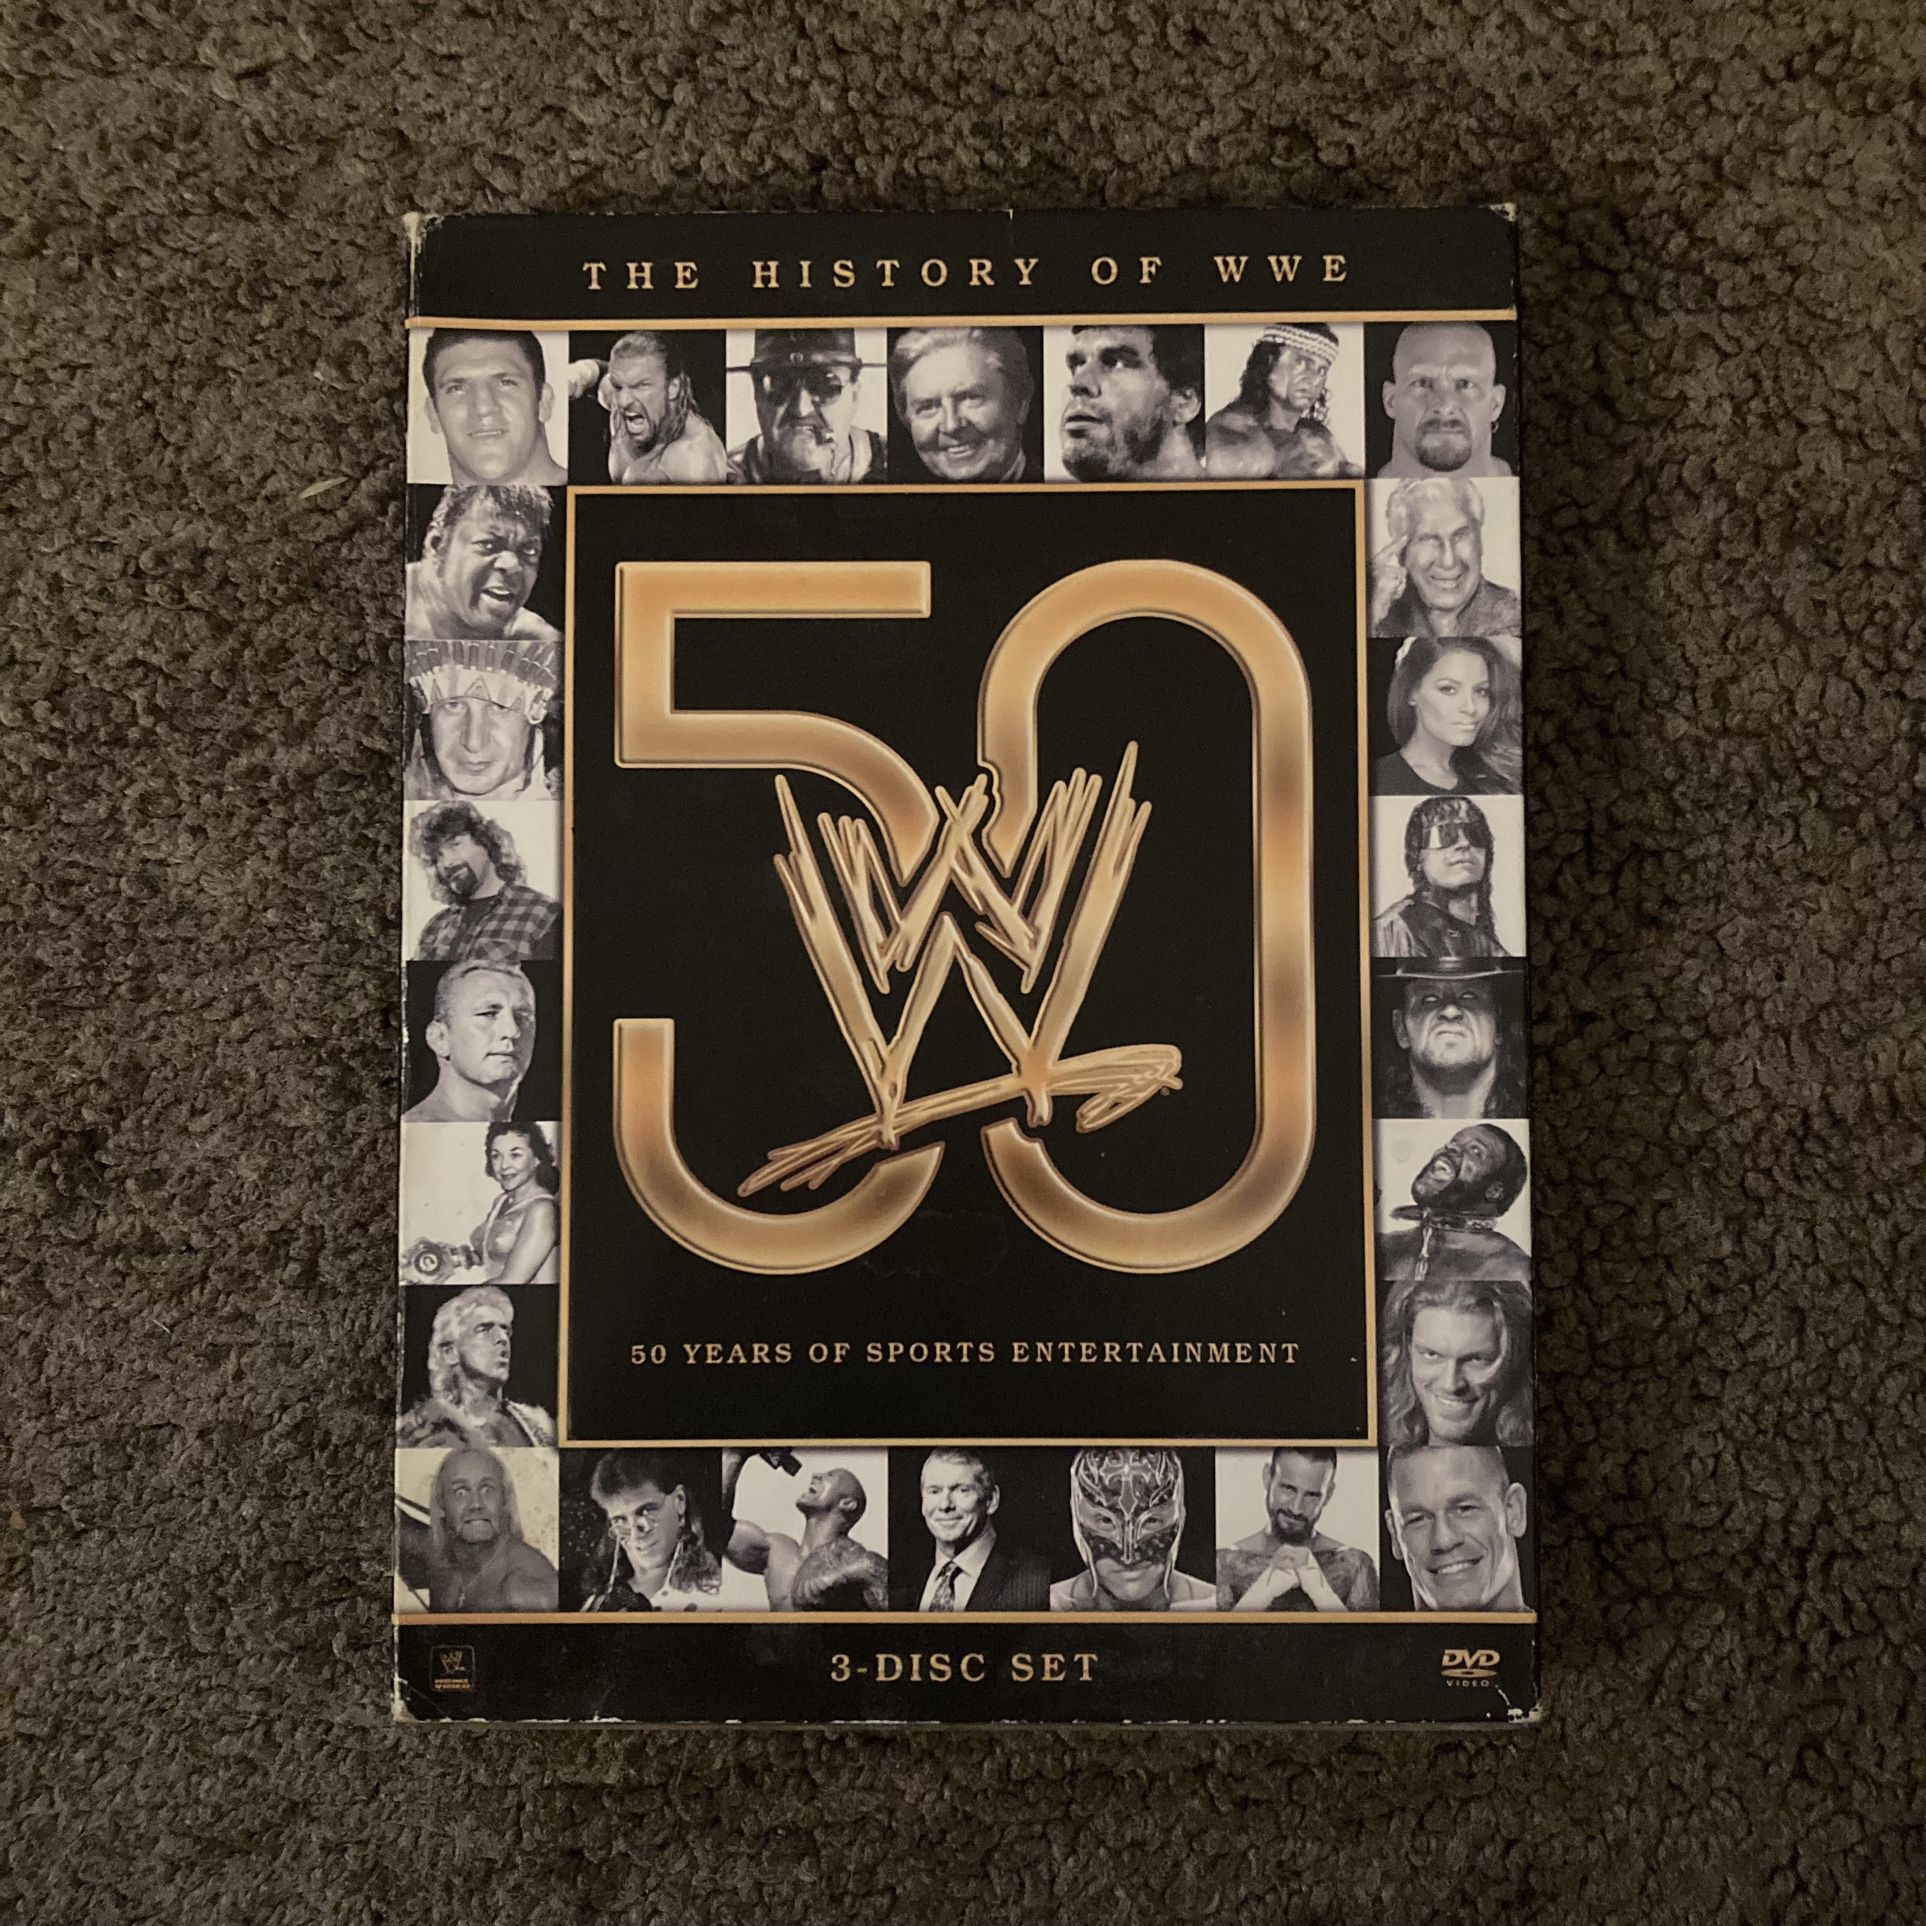 The History Or WWE: 50 Years Of Sports Entertainment 